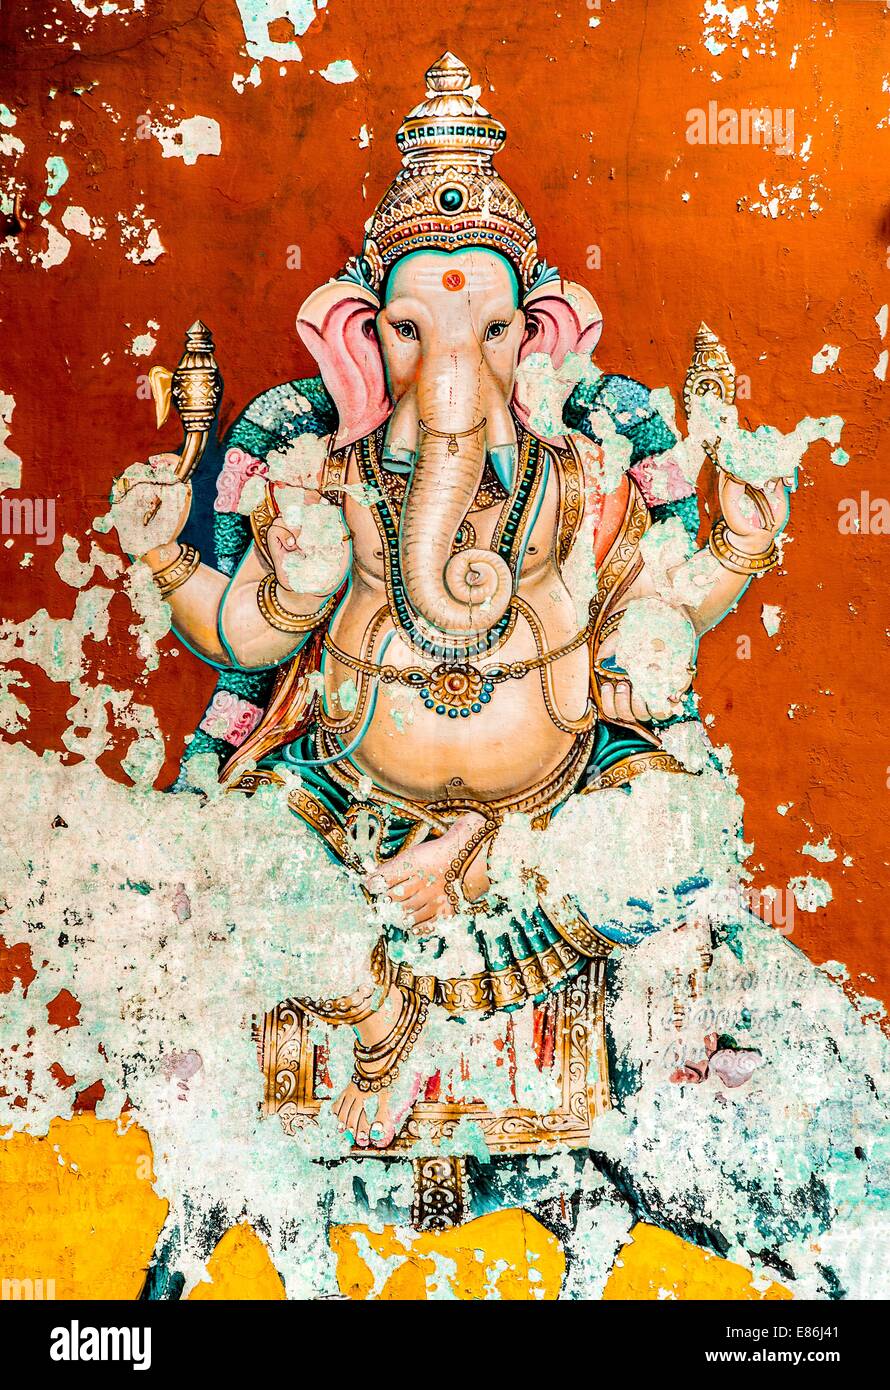 Ganesh ancient fresco (also spelled Ganesa and Ganesh), is one of the best-known and most widely worshipped deities in the Hindu pantheon. His image is found throughout India and Nepal. Stock Photo